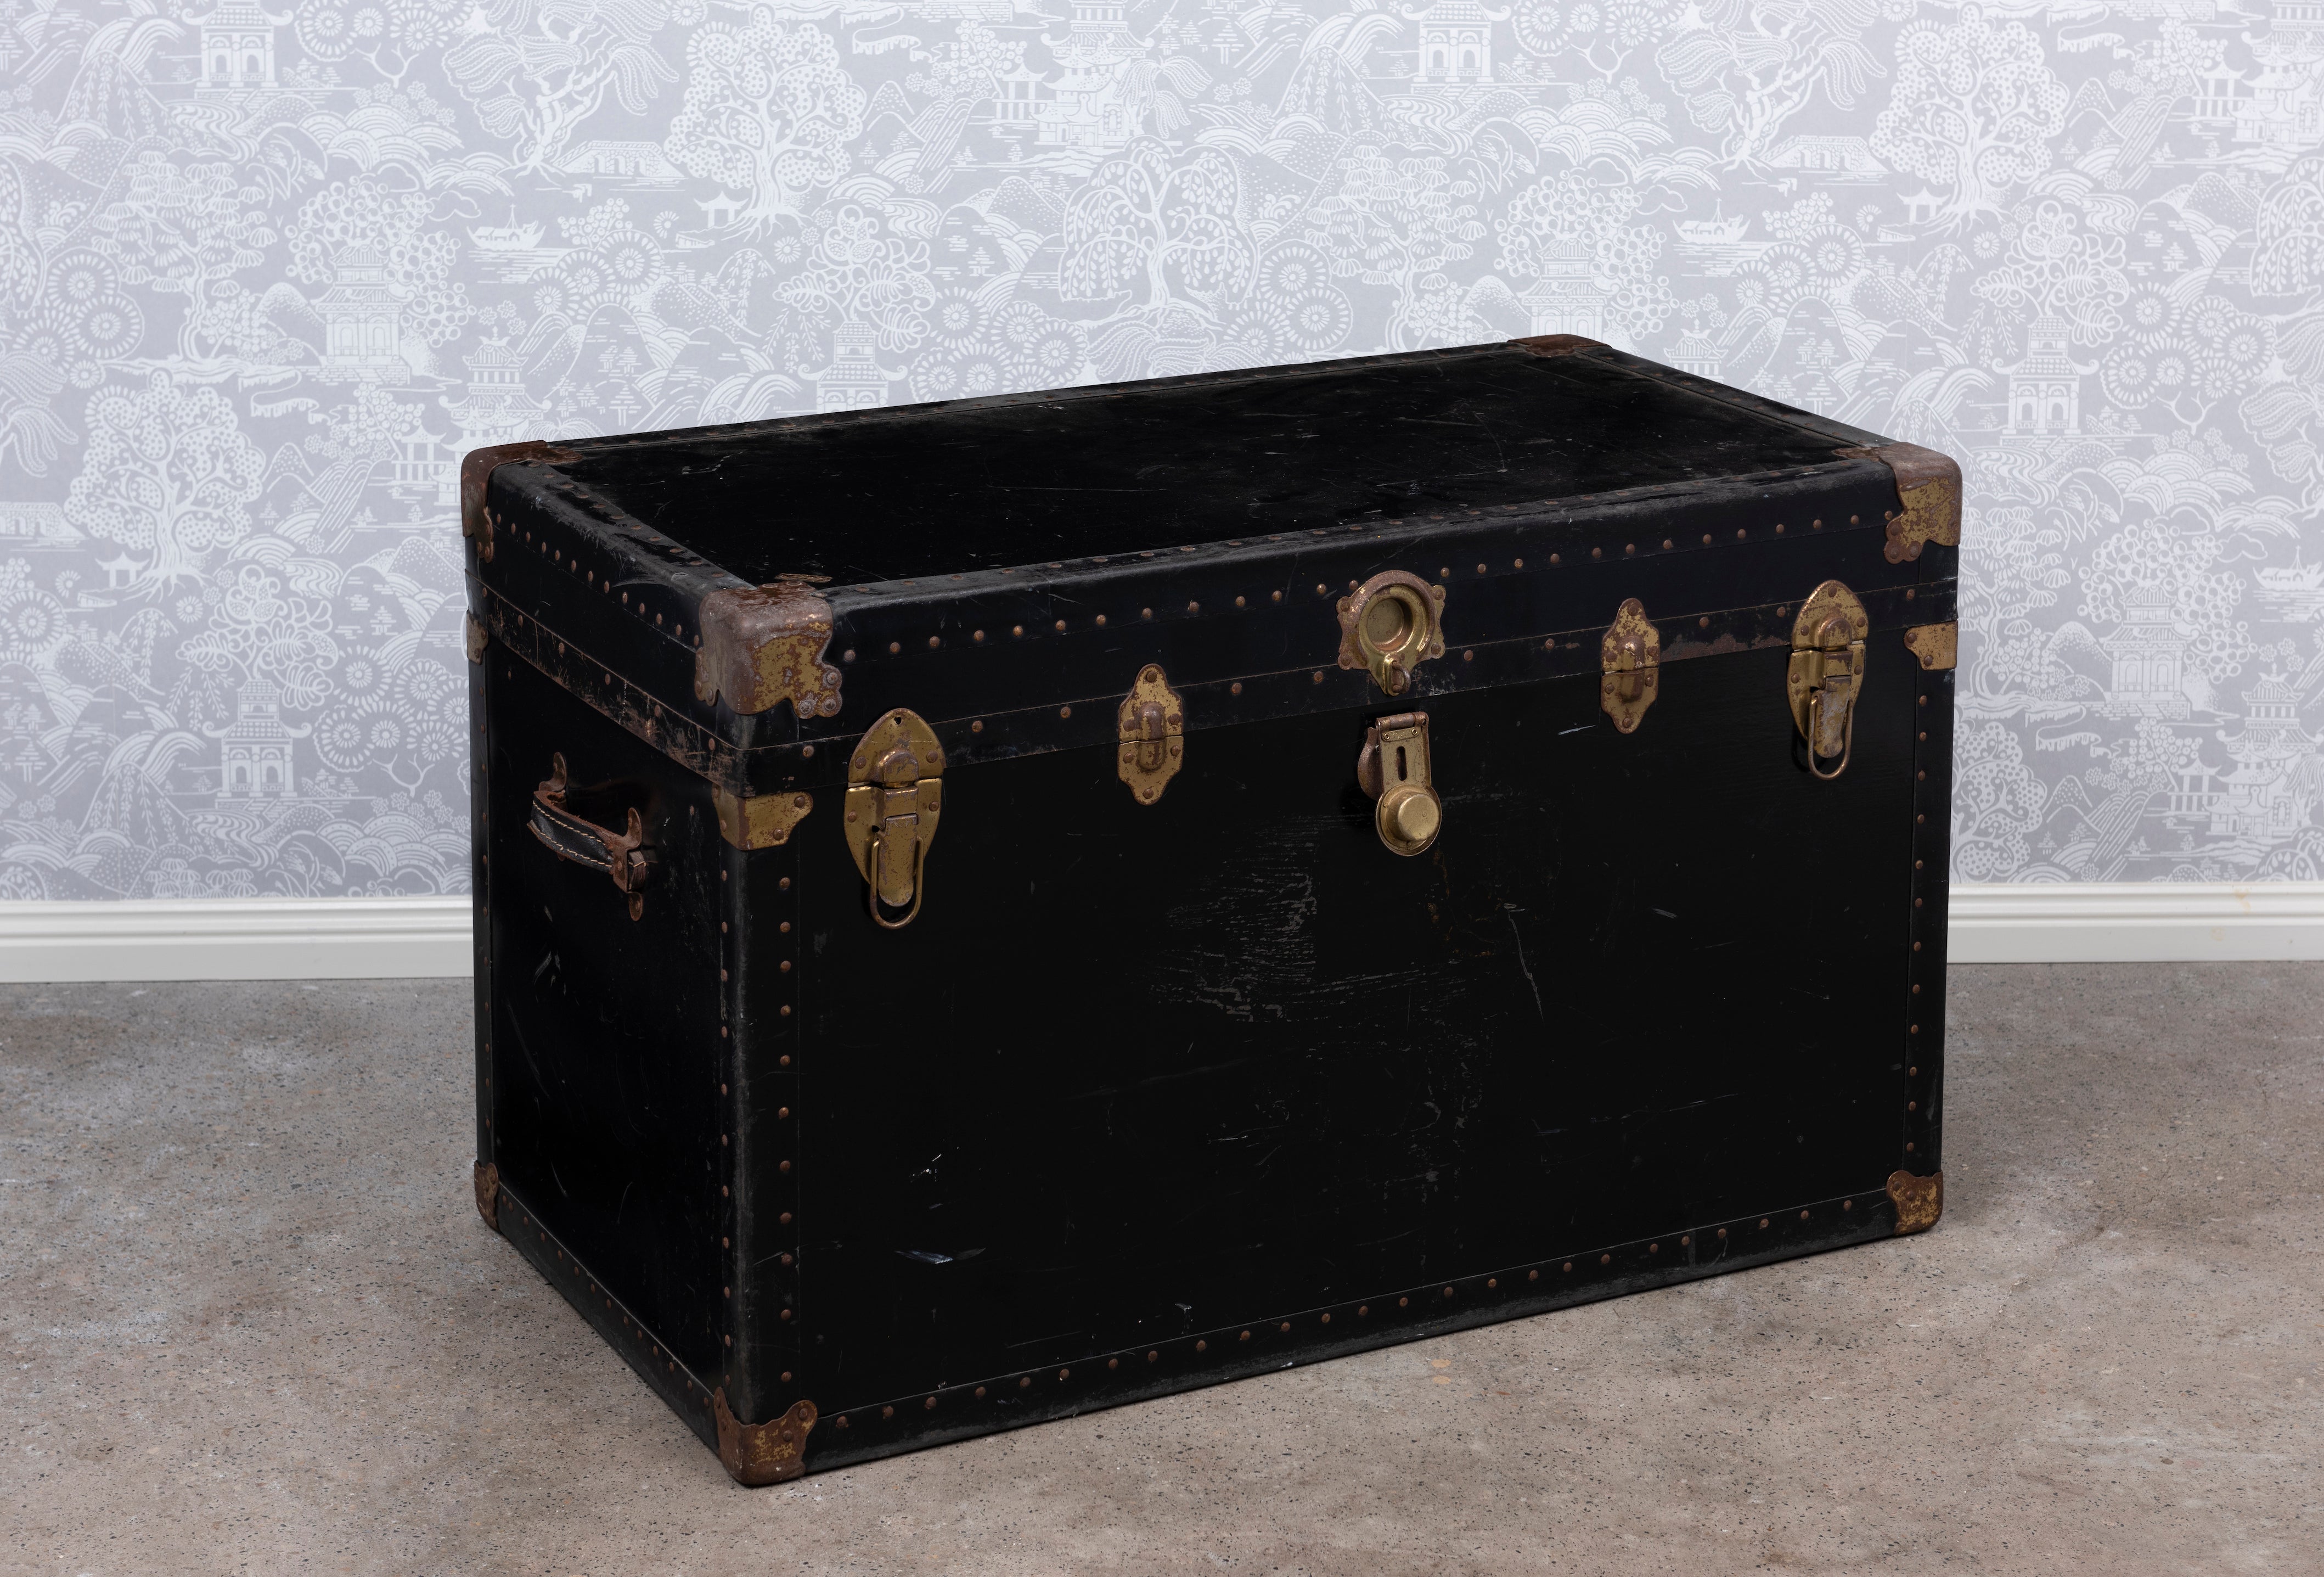 New/Old Steamer Trunk